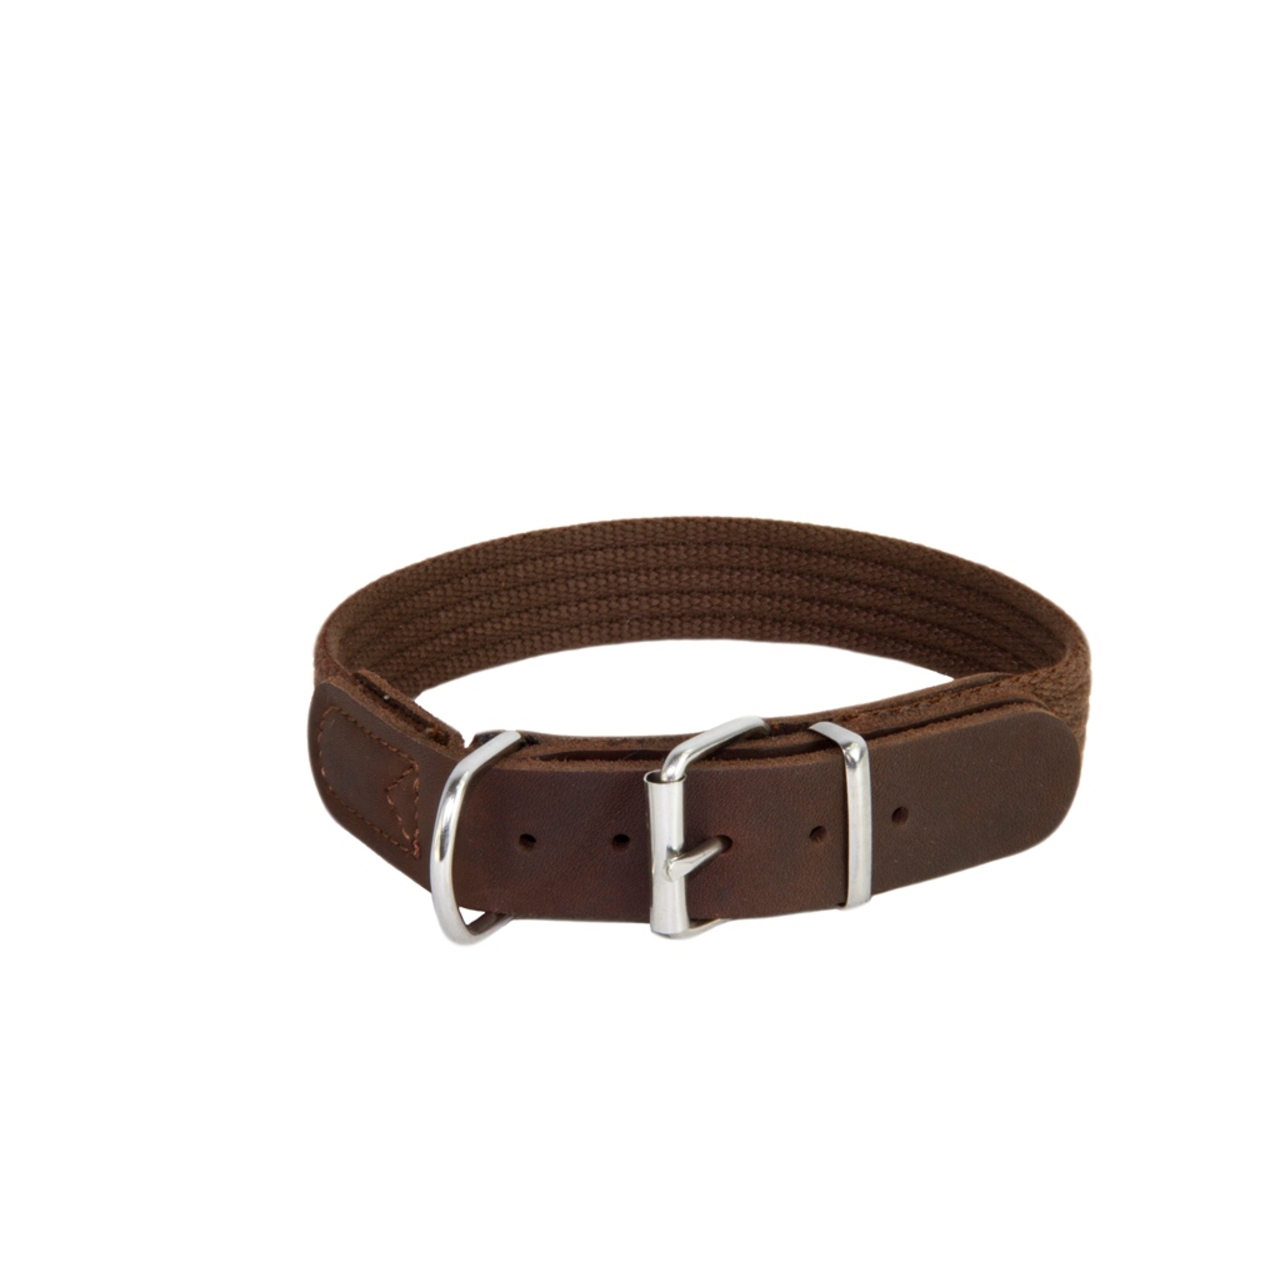 An image of Earthbound Cotton Brown Collar 31 - 37cm